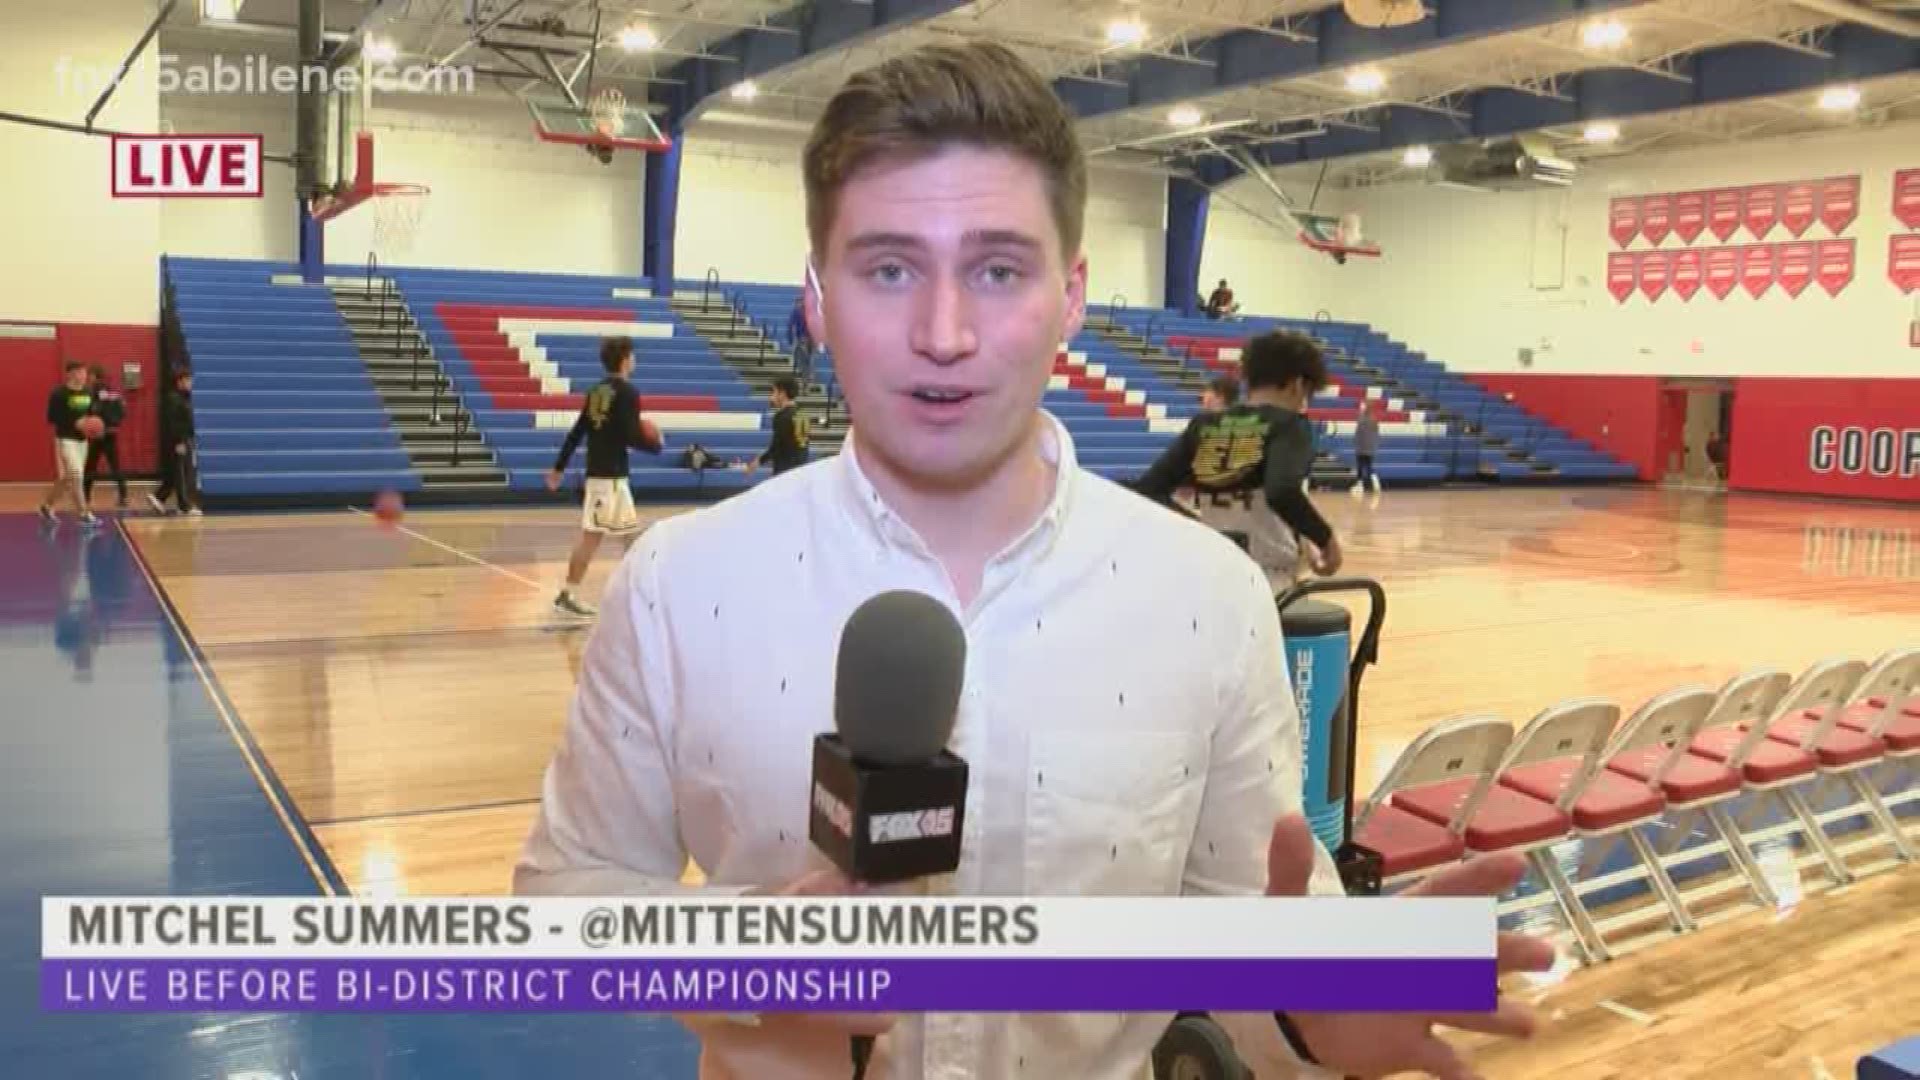 Our Mitchel Summers previewed a game between Colorado City and Dublin.